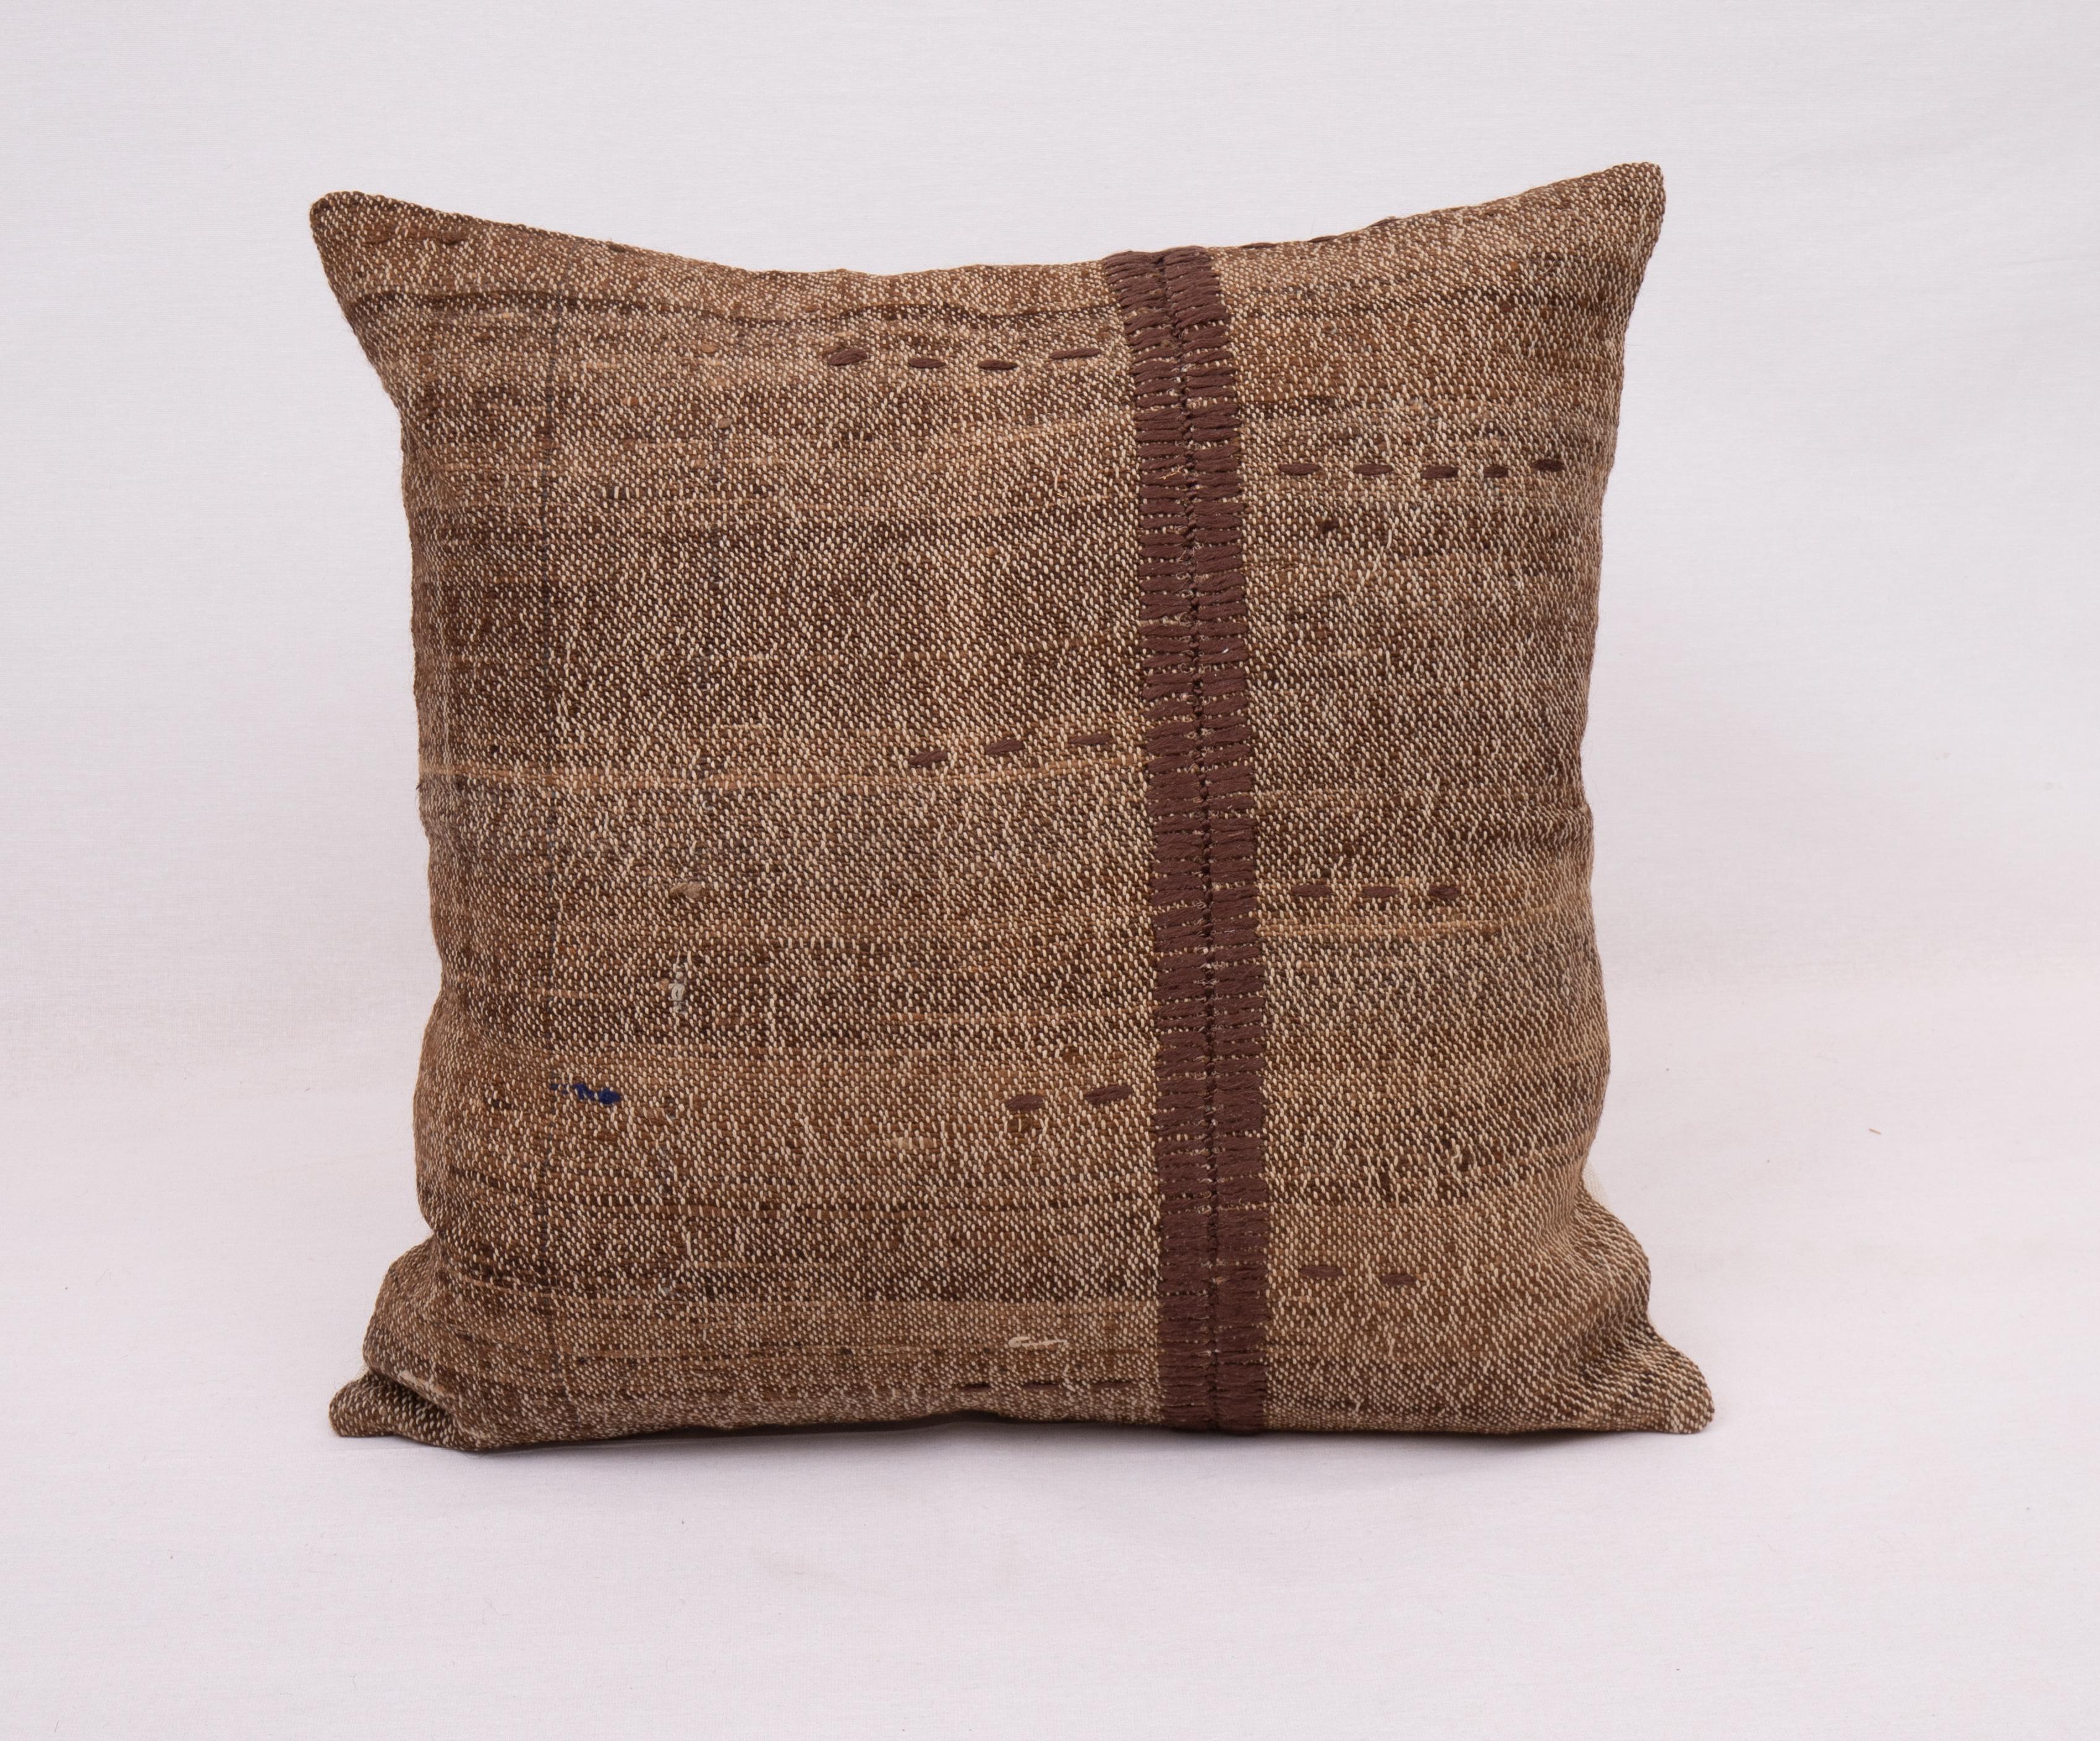 Rustic Pillow Case Made from a Vintage Un-Dyed Wool Coverlet, Mid 20th C


This pillow is made from a vintage coverlet that is hand woven using un-dyed wool. Our addition to the piece is silk hand stitching. It does not come with an insert. Linen